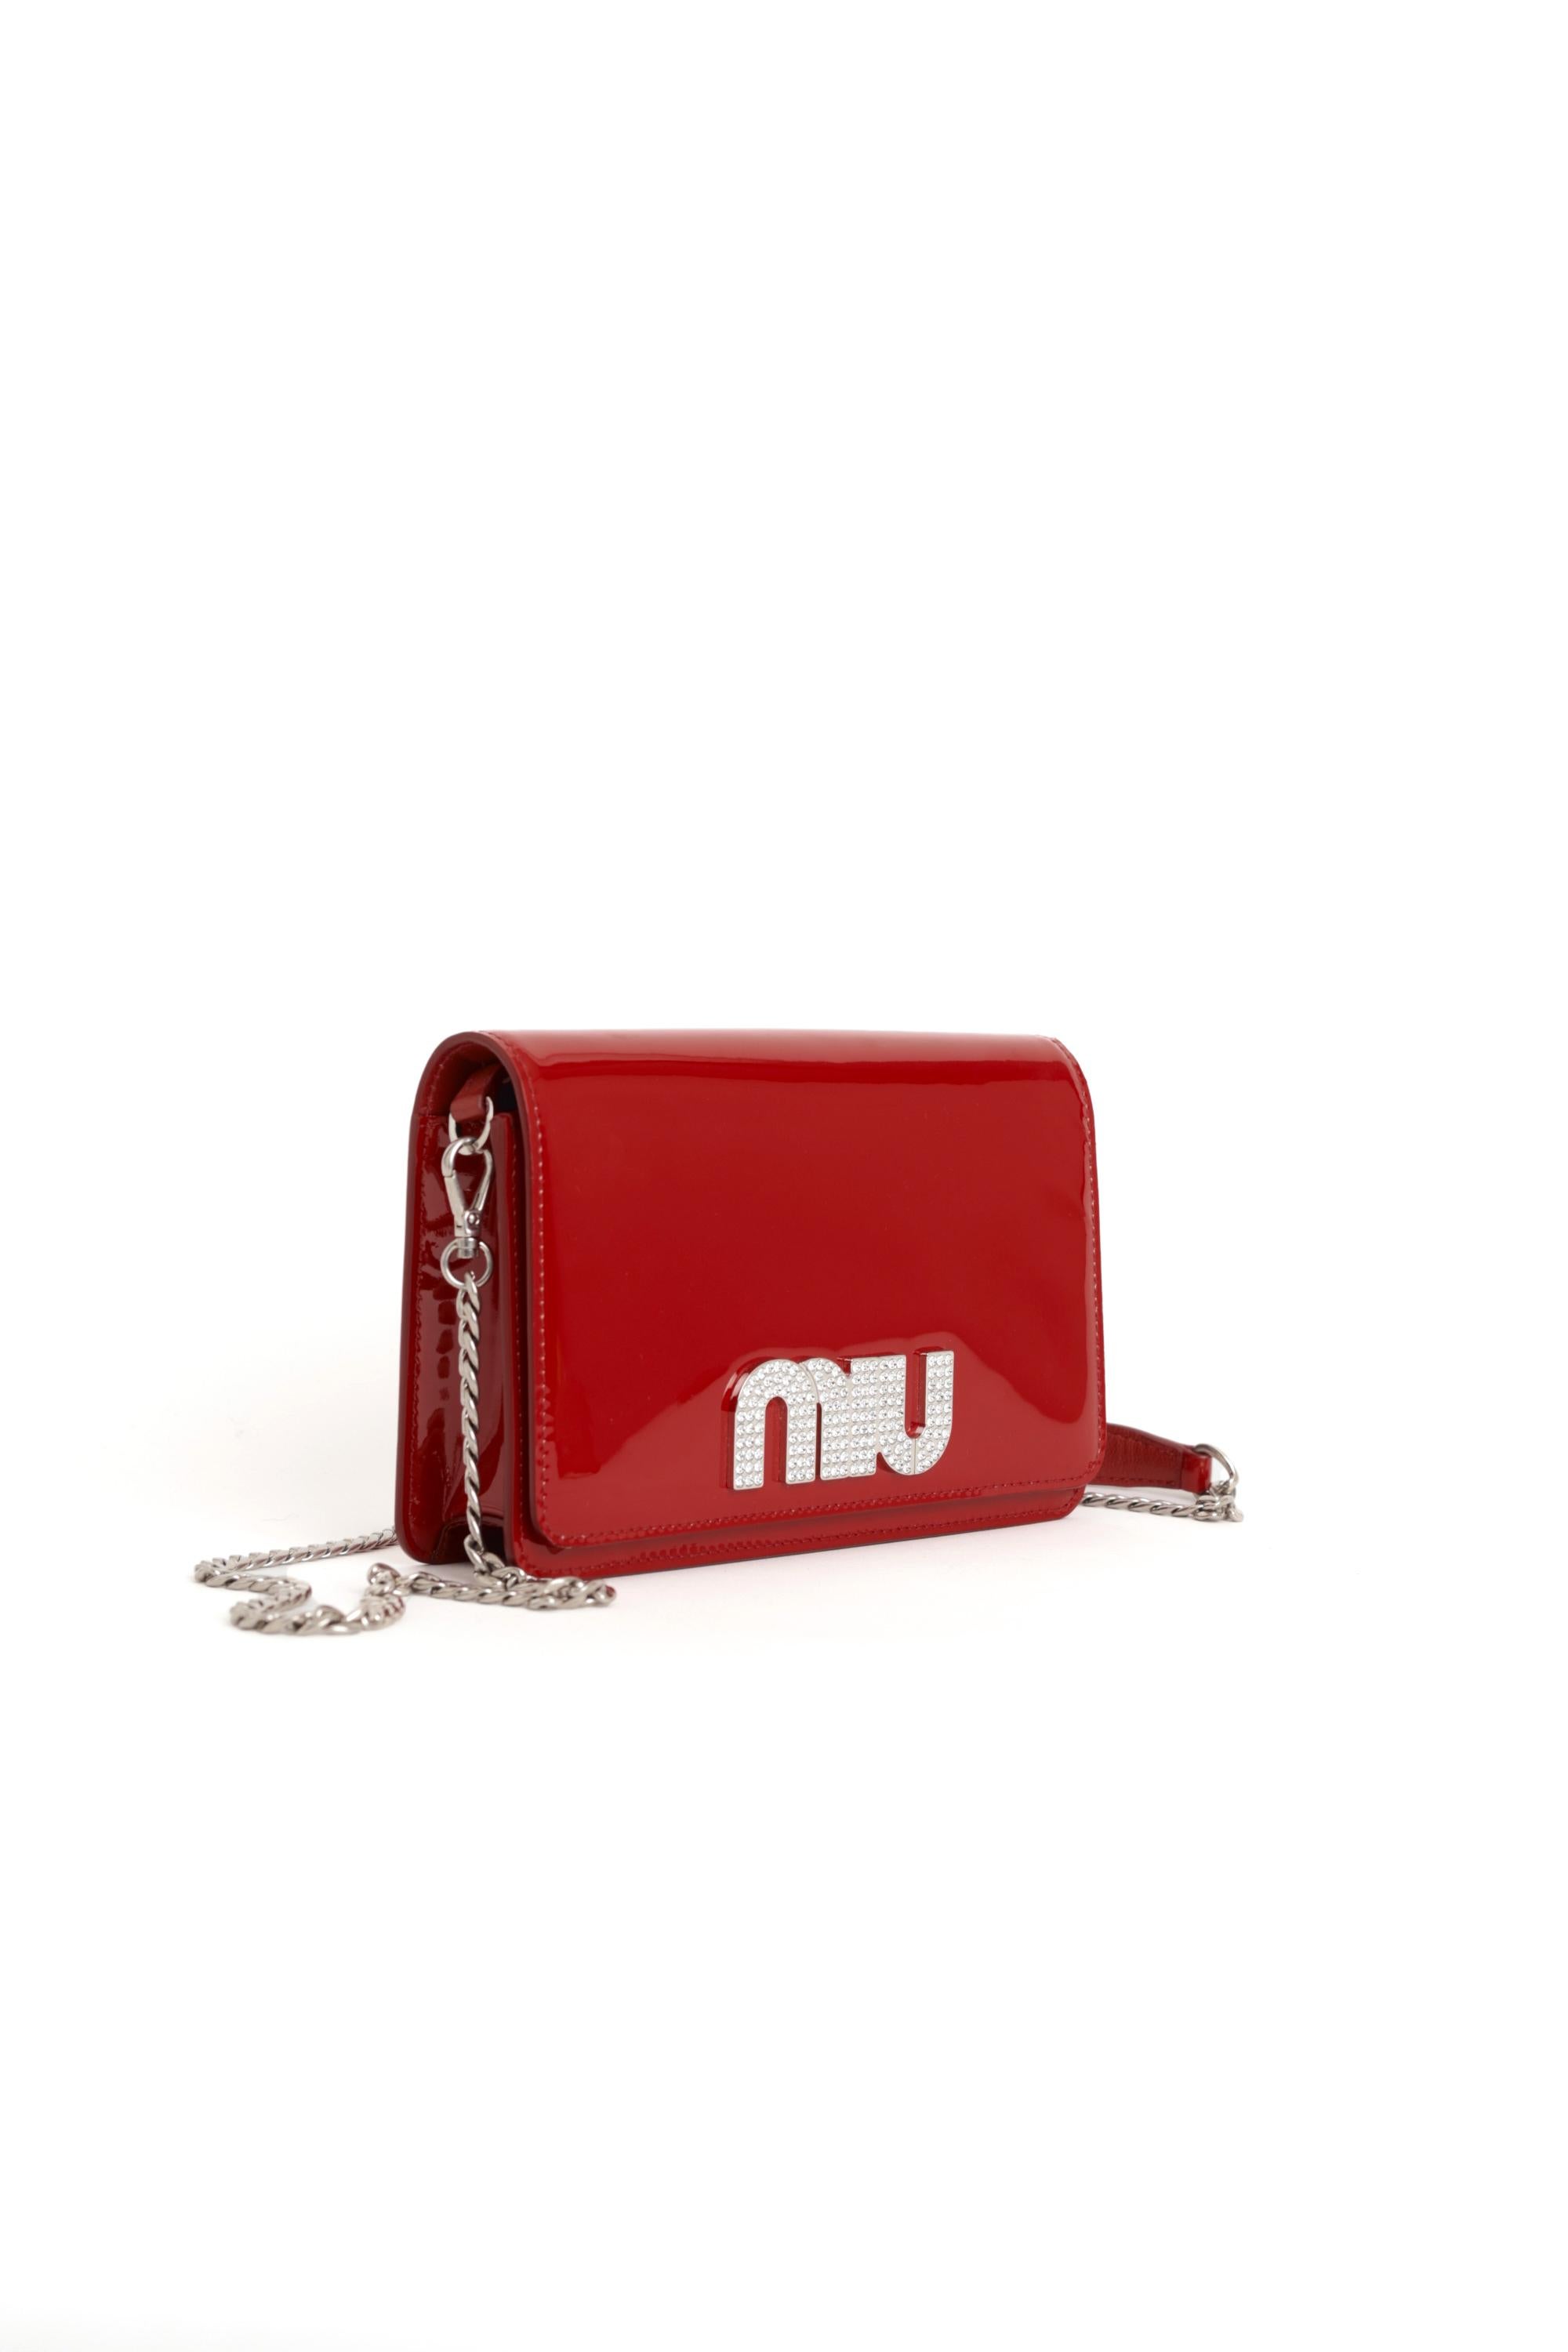 Red Miu Miu 2000’s Patent Leather Crossbody Bag For Sale